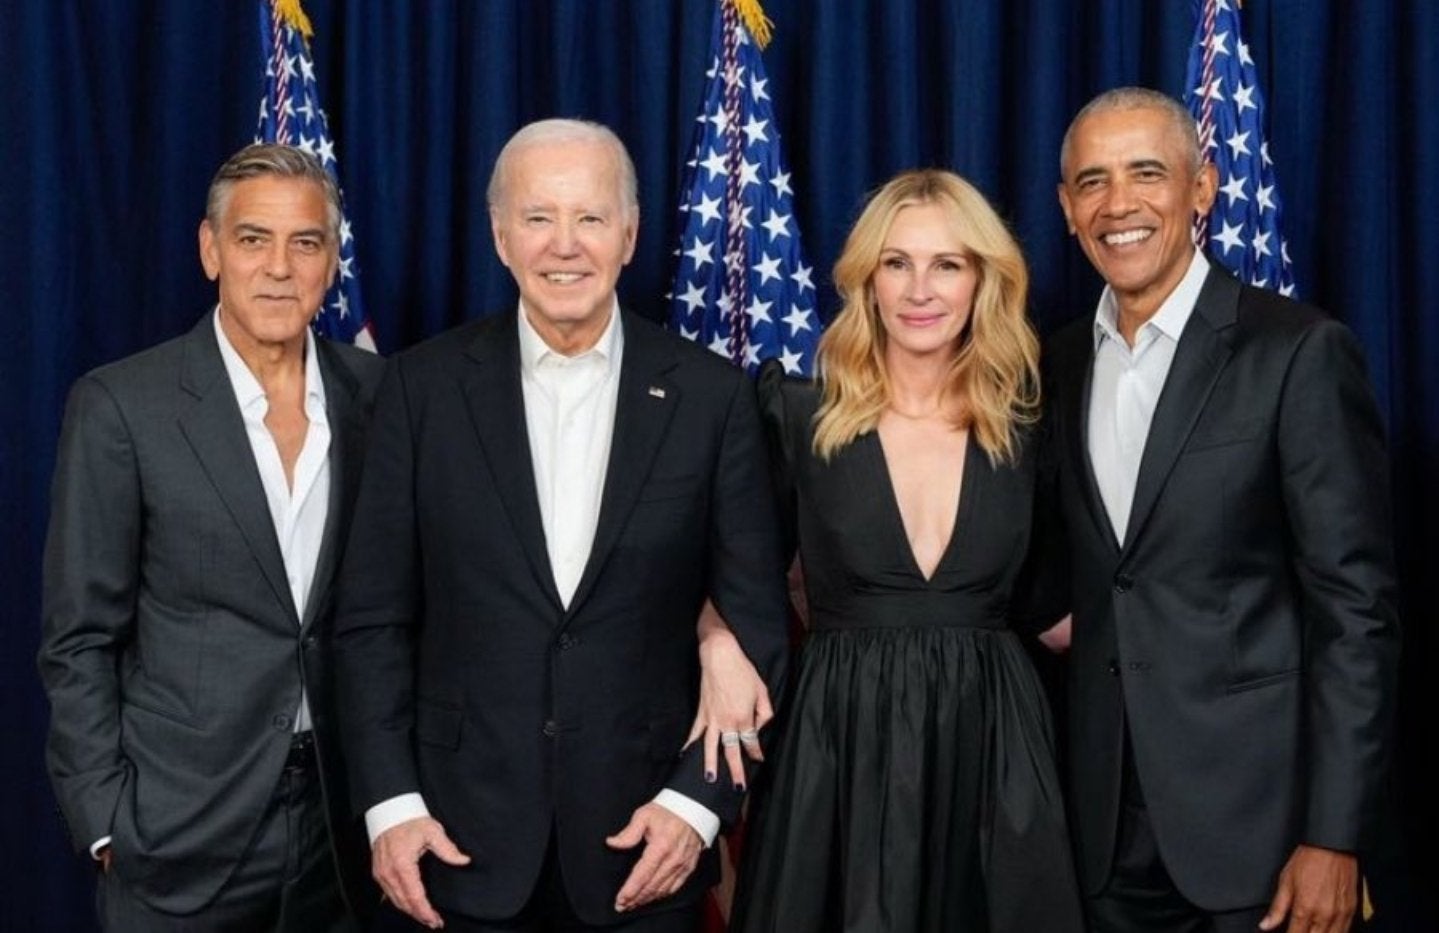 Two weeks before his disastrous debate performance, Biden attended a star-studded fundraiser in Los Angeles — about 2,000 miles away.